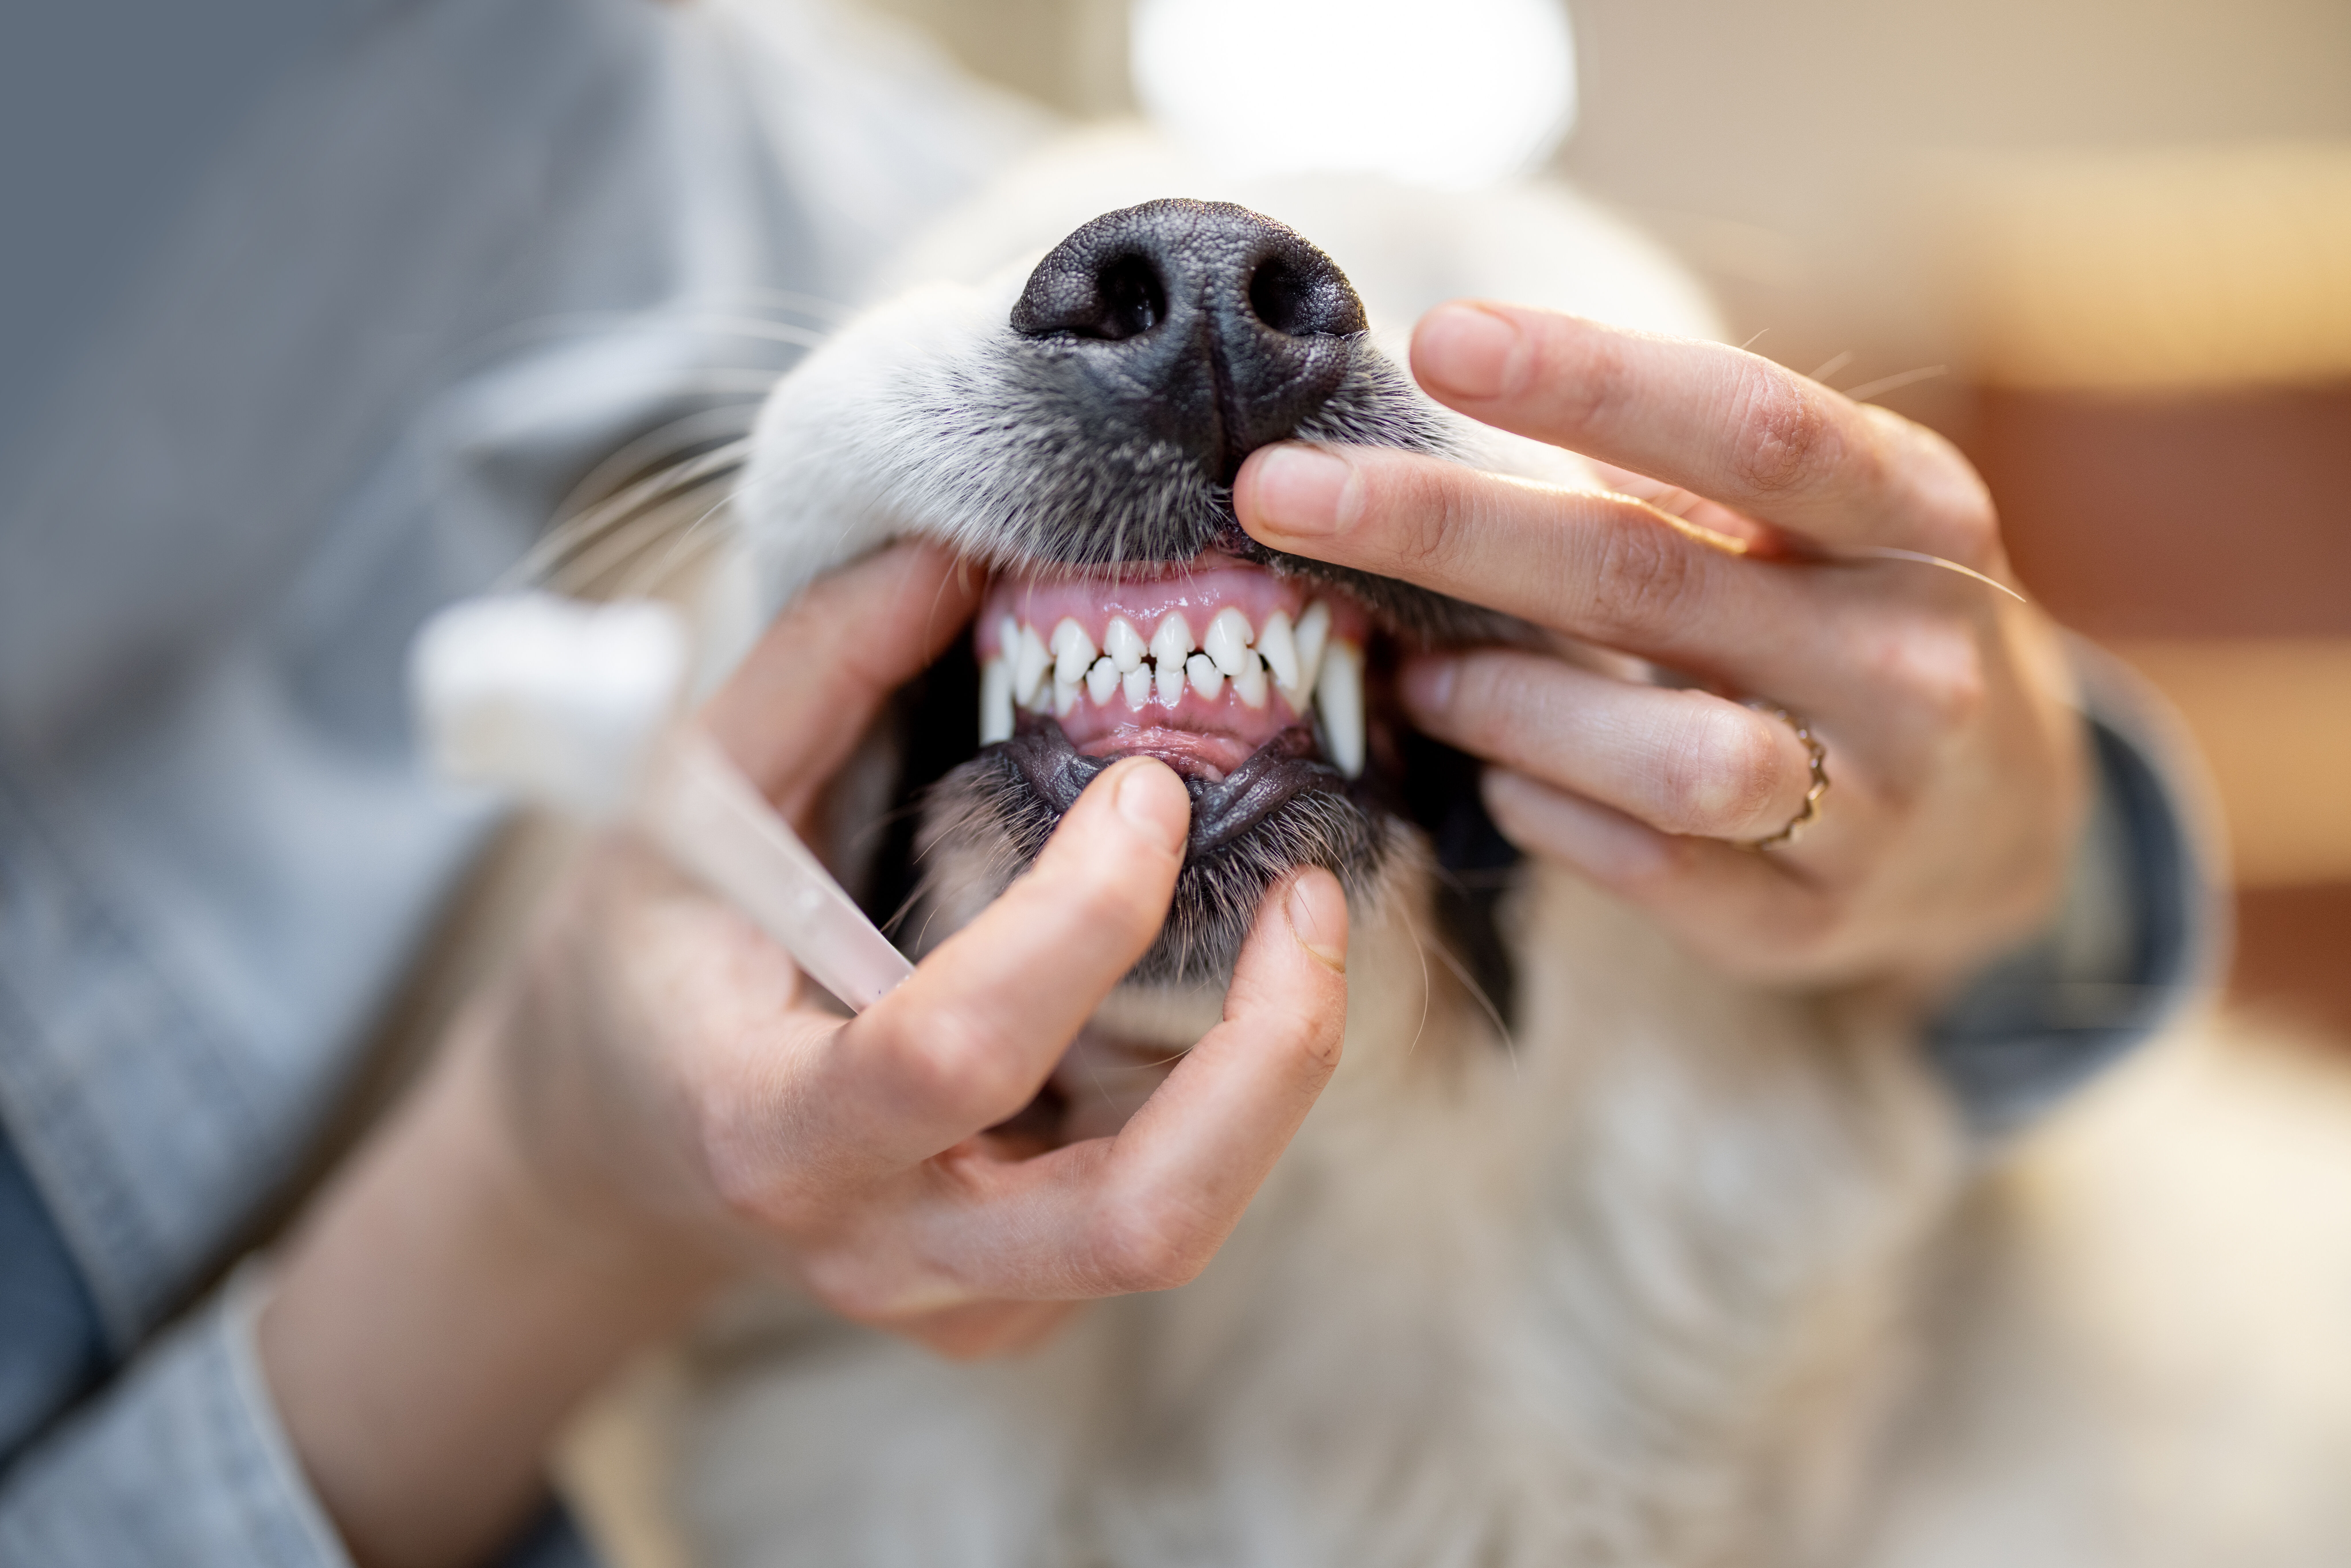 Brushing up: A step-by-step guide to canine tooth brushing